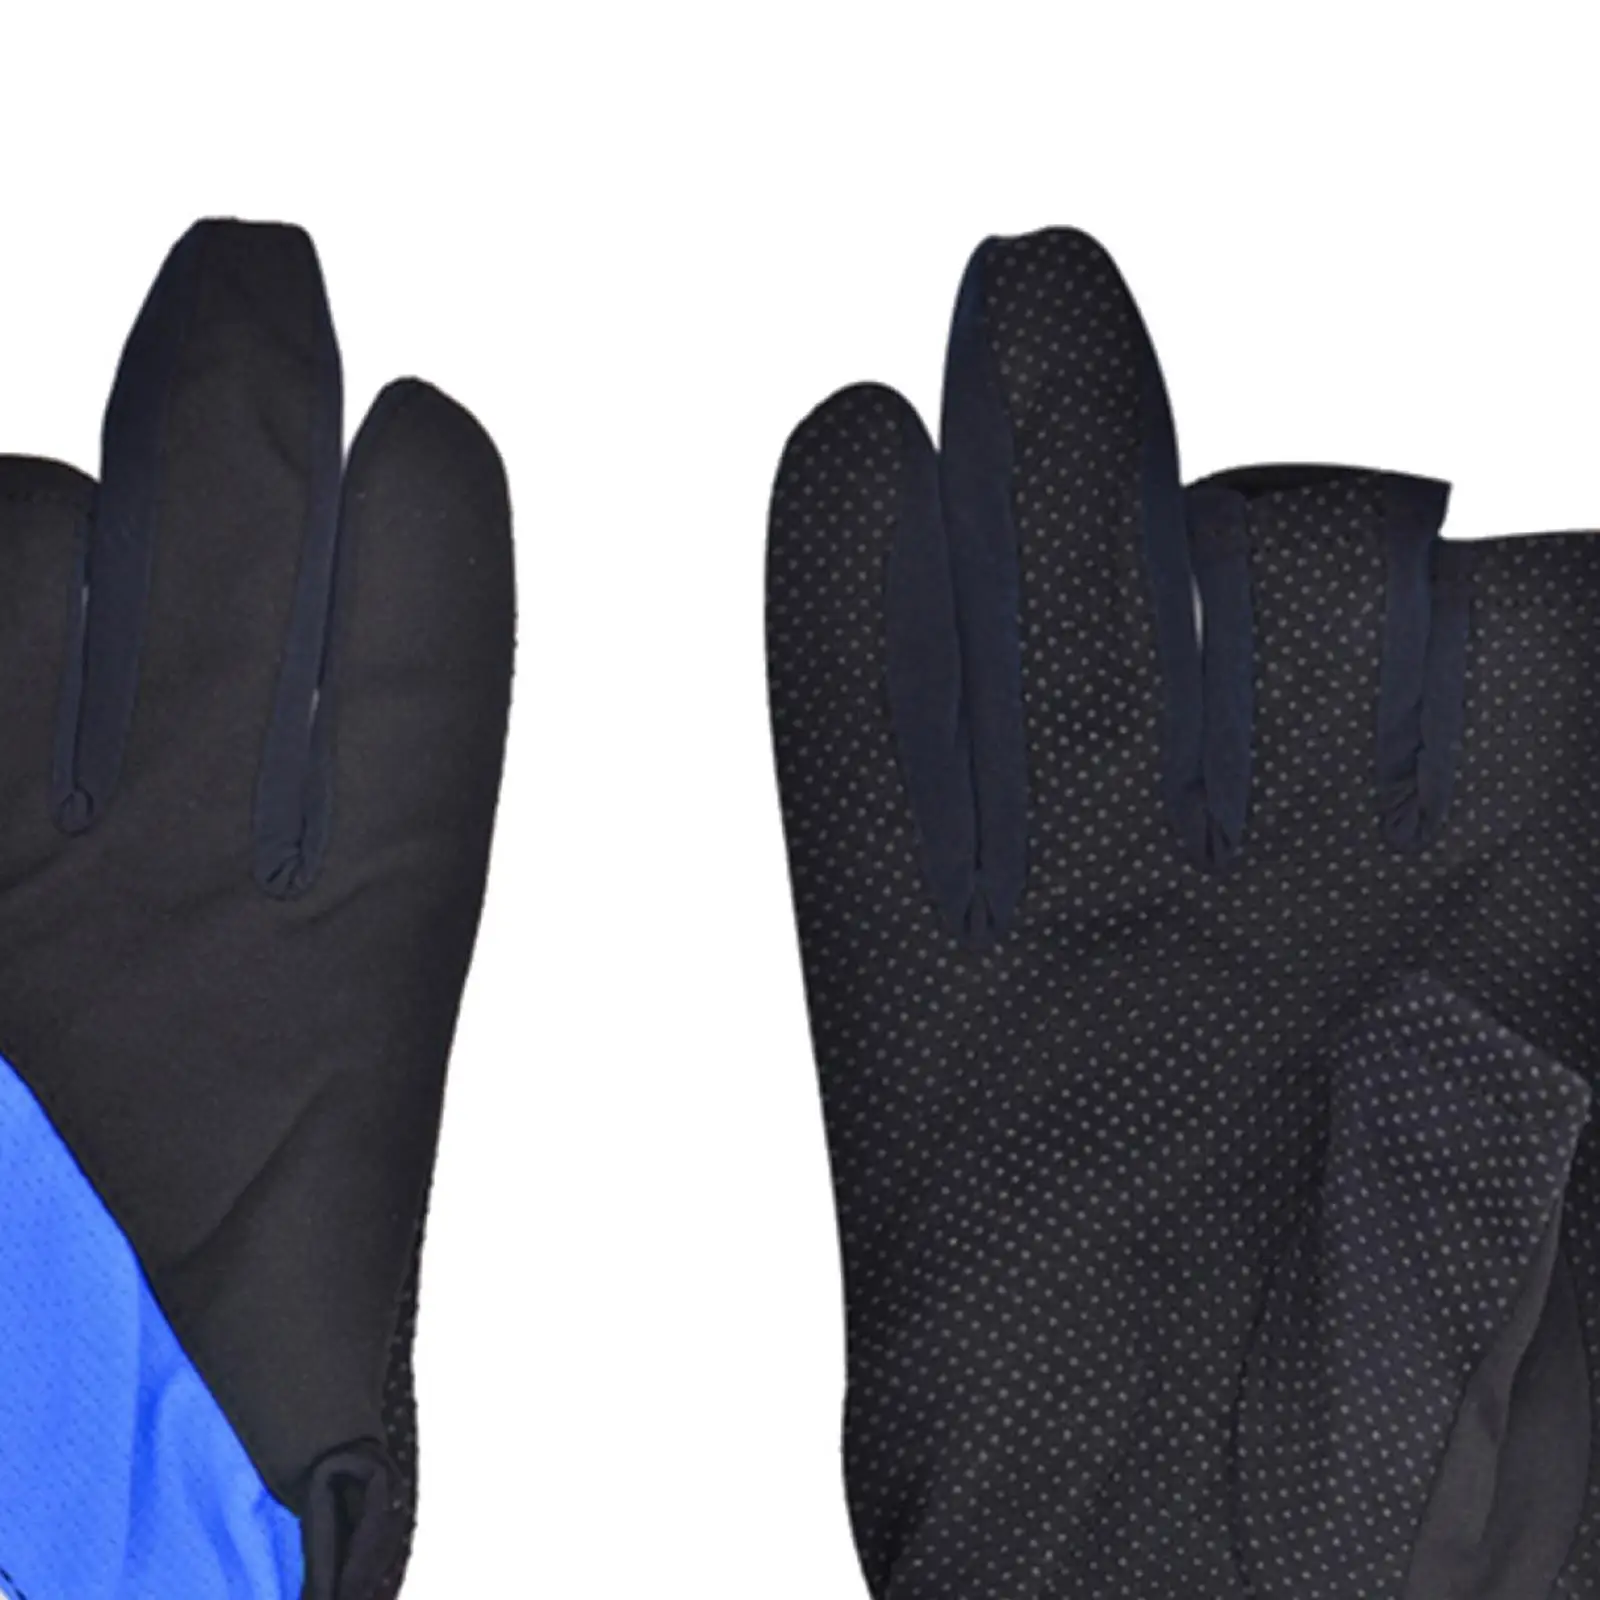 3 Cut Fingers Gloves Finger Protector Gloves Comfortable Adult Breathable Anti